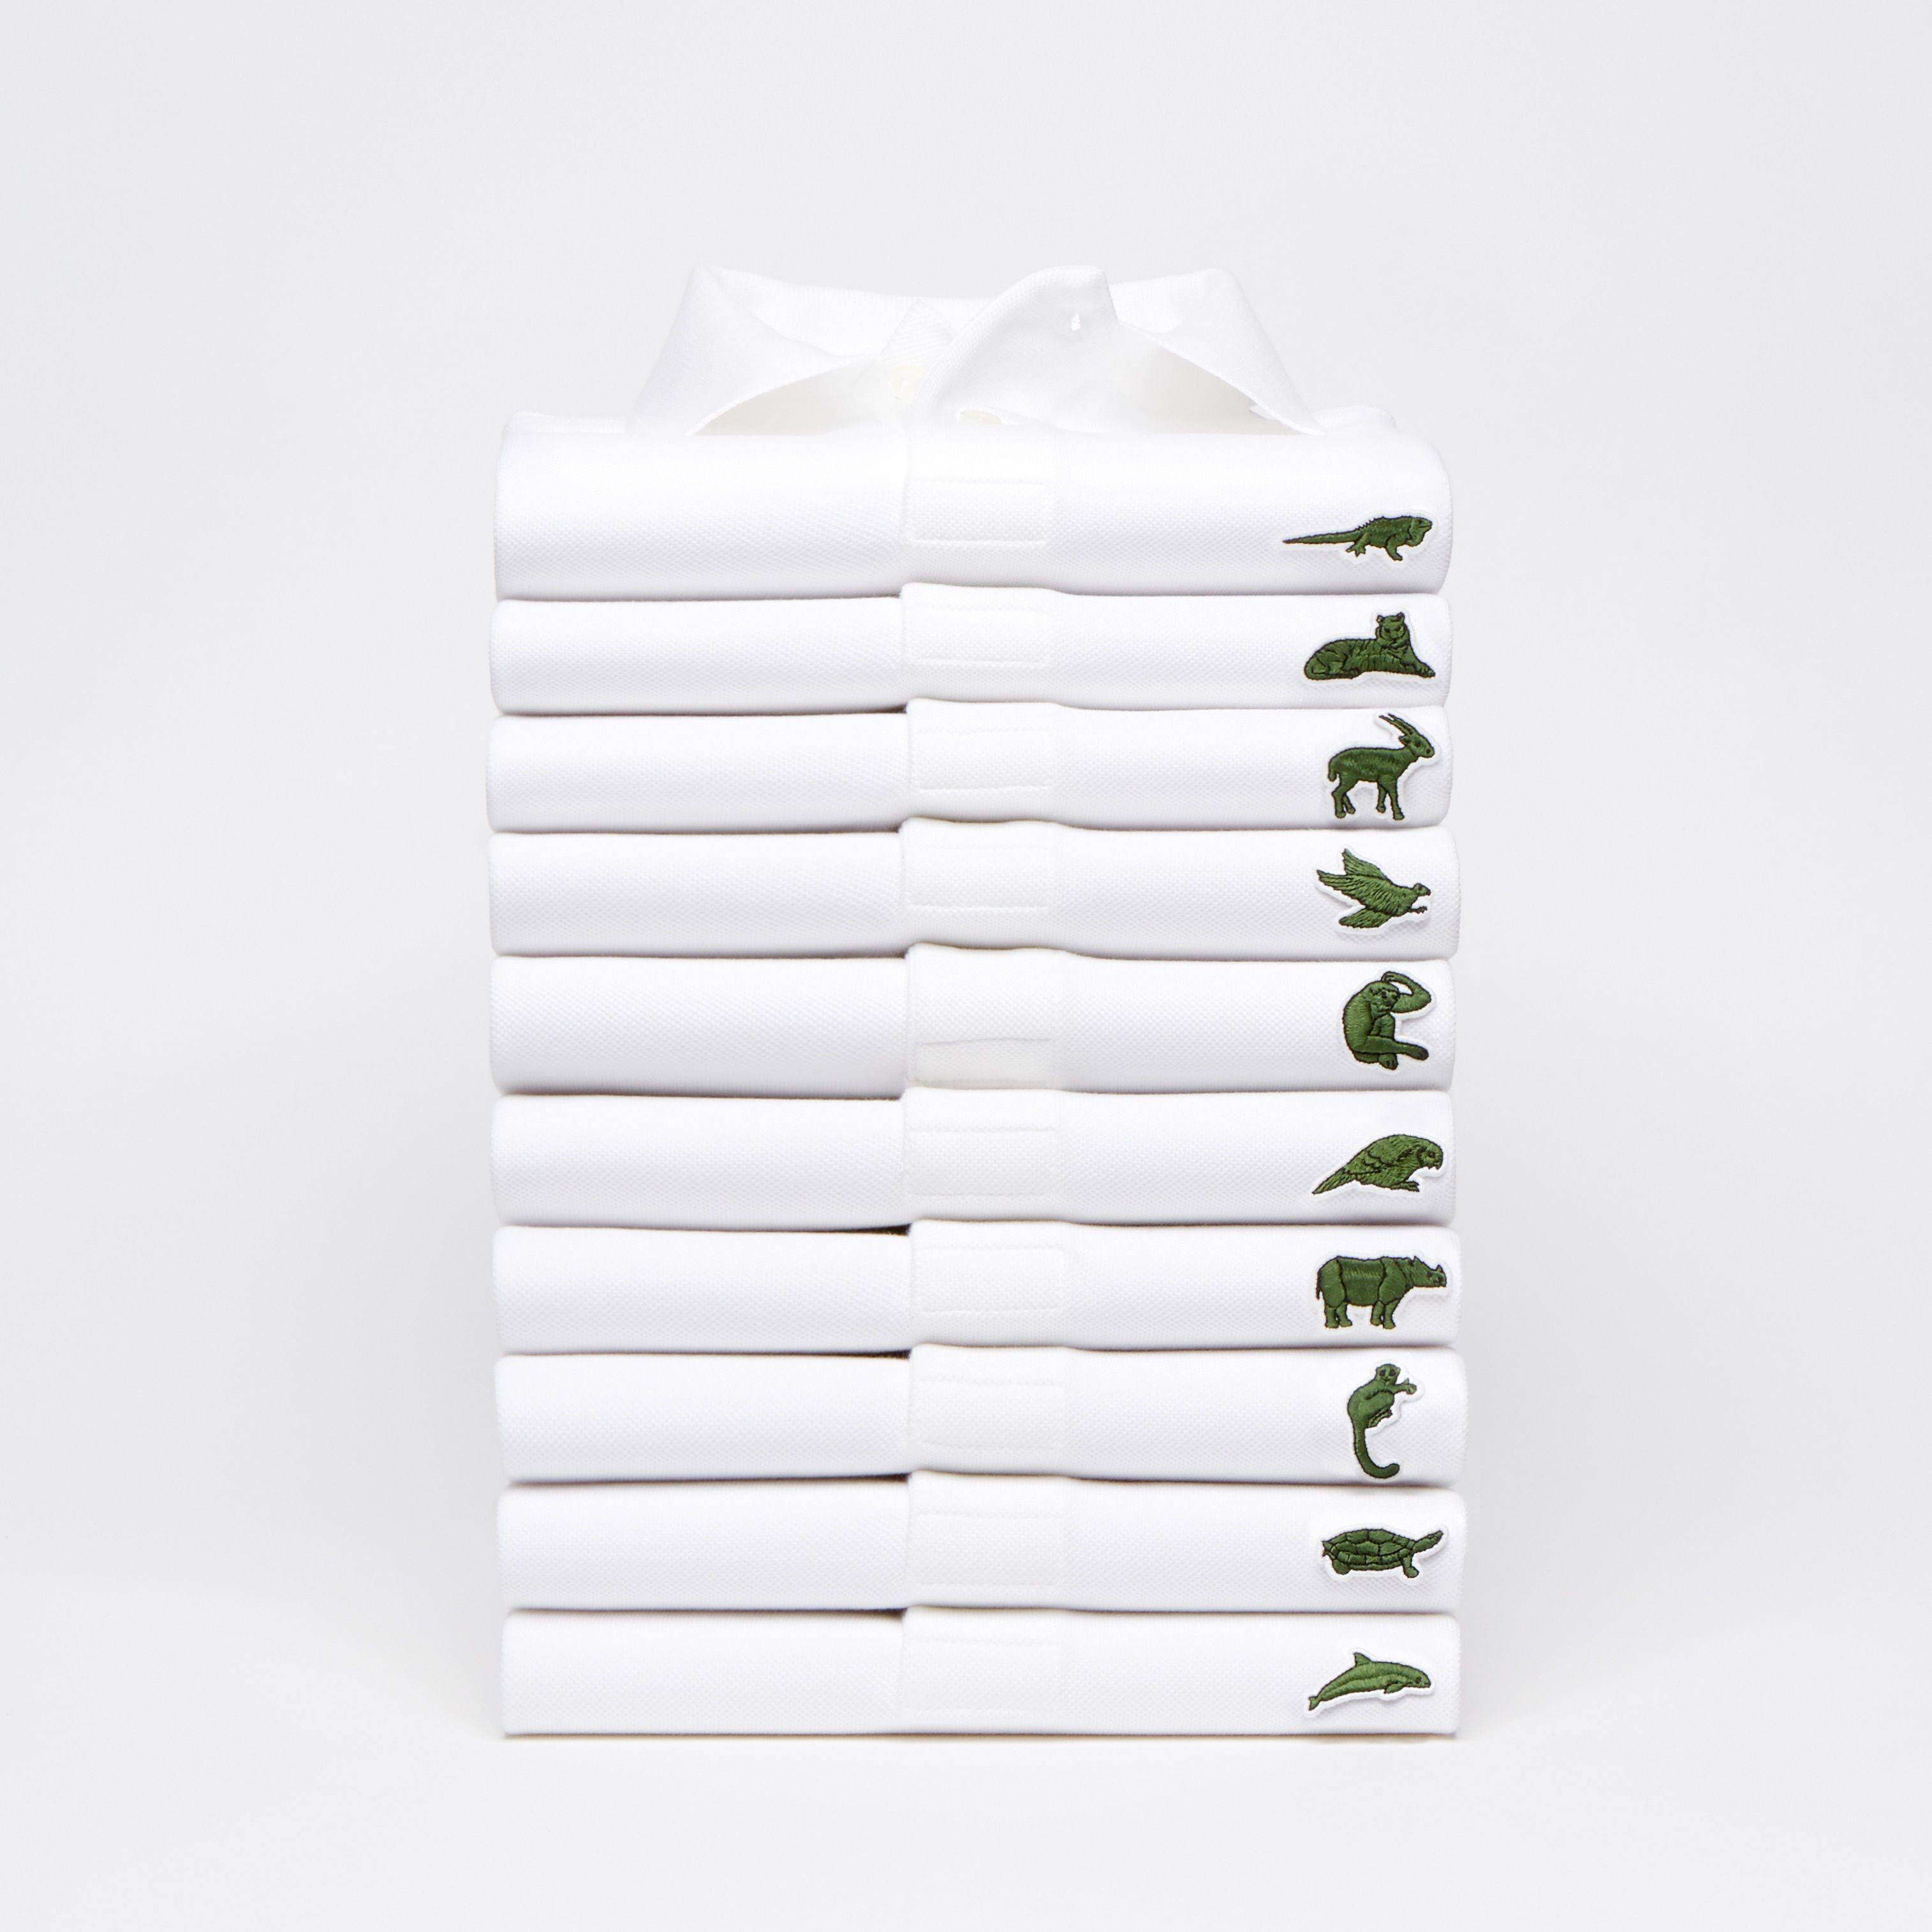 lacoste from